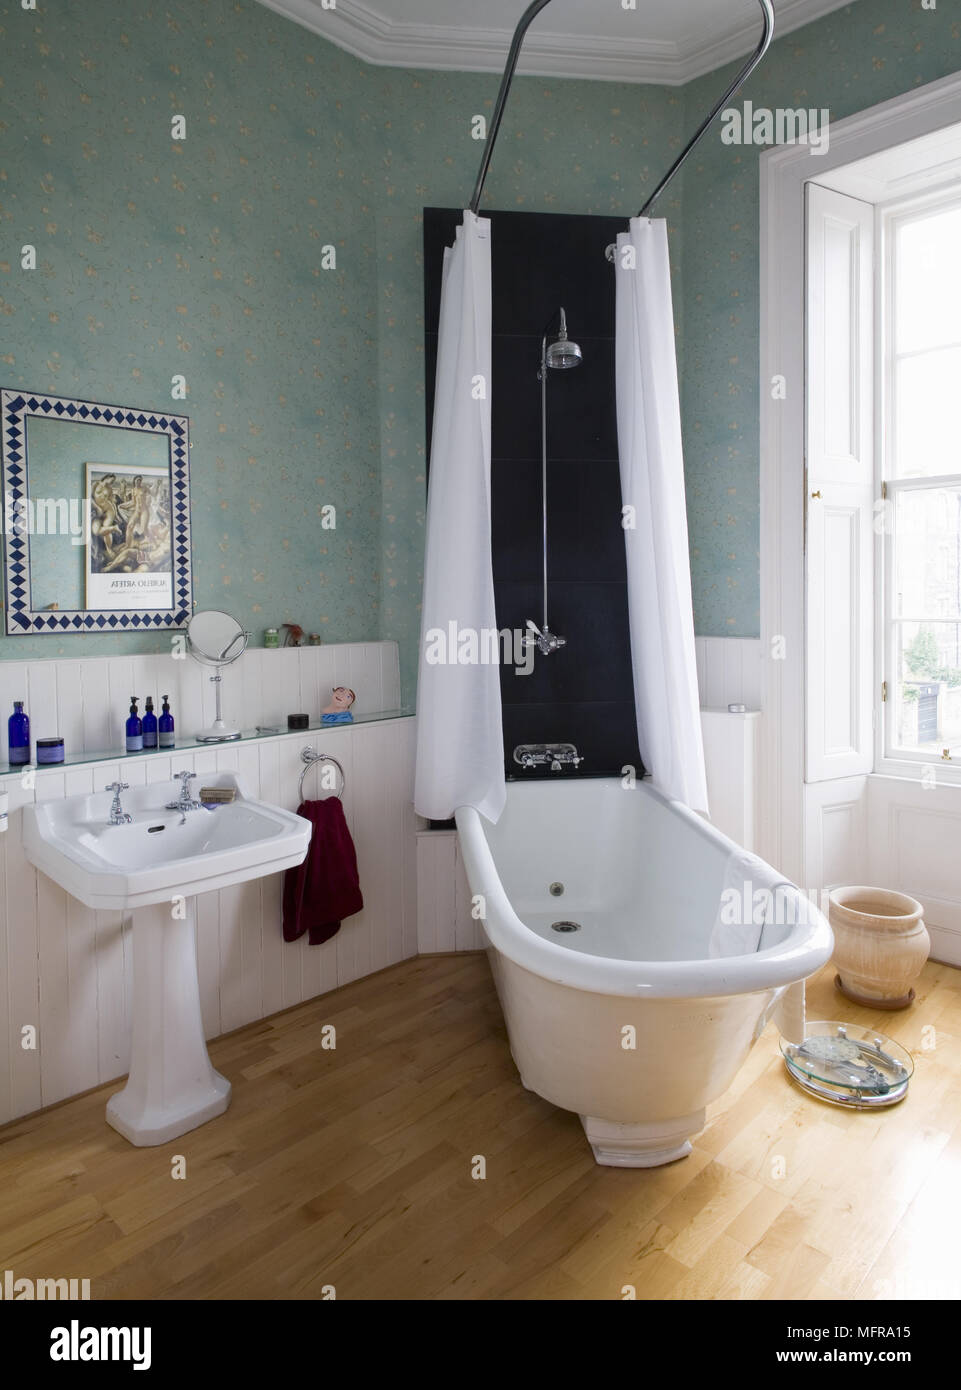 Old fashioned style freestanding roll top bathtub with overhead shower  Stock Photo - Alamy